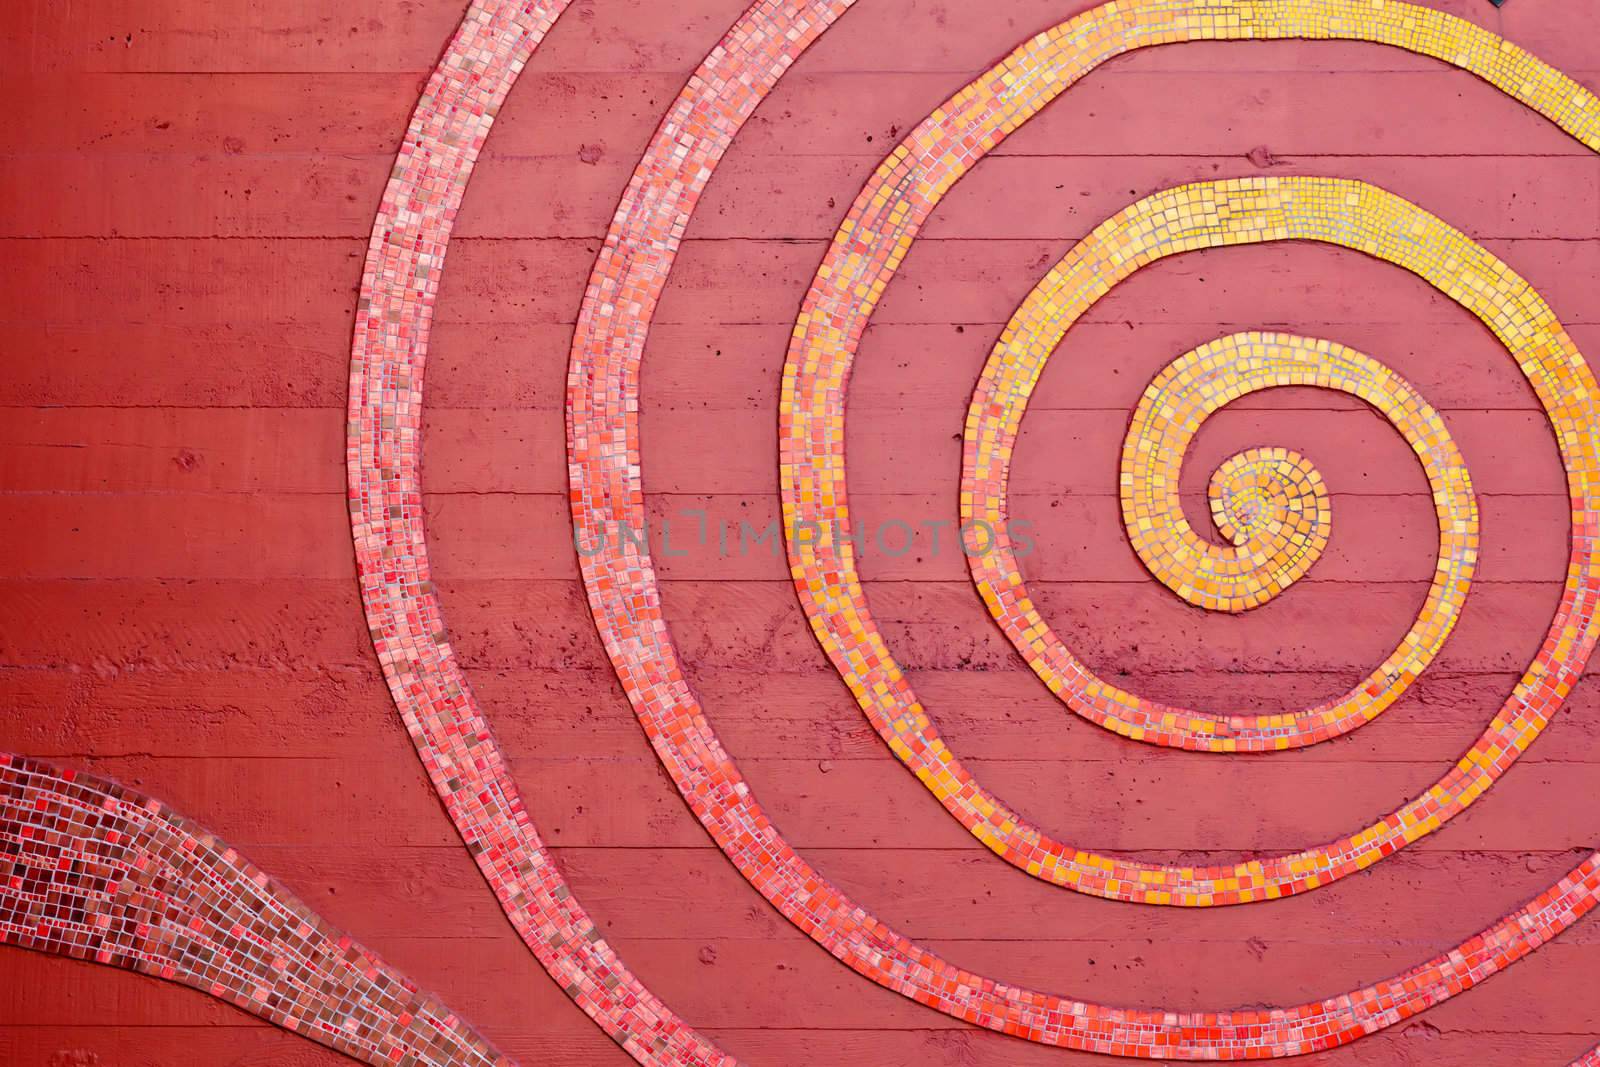 Mosaic Spiral on the Wall